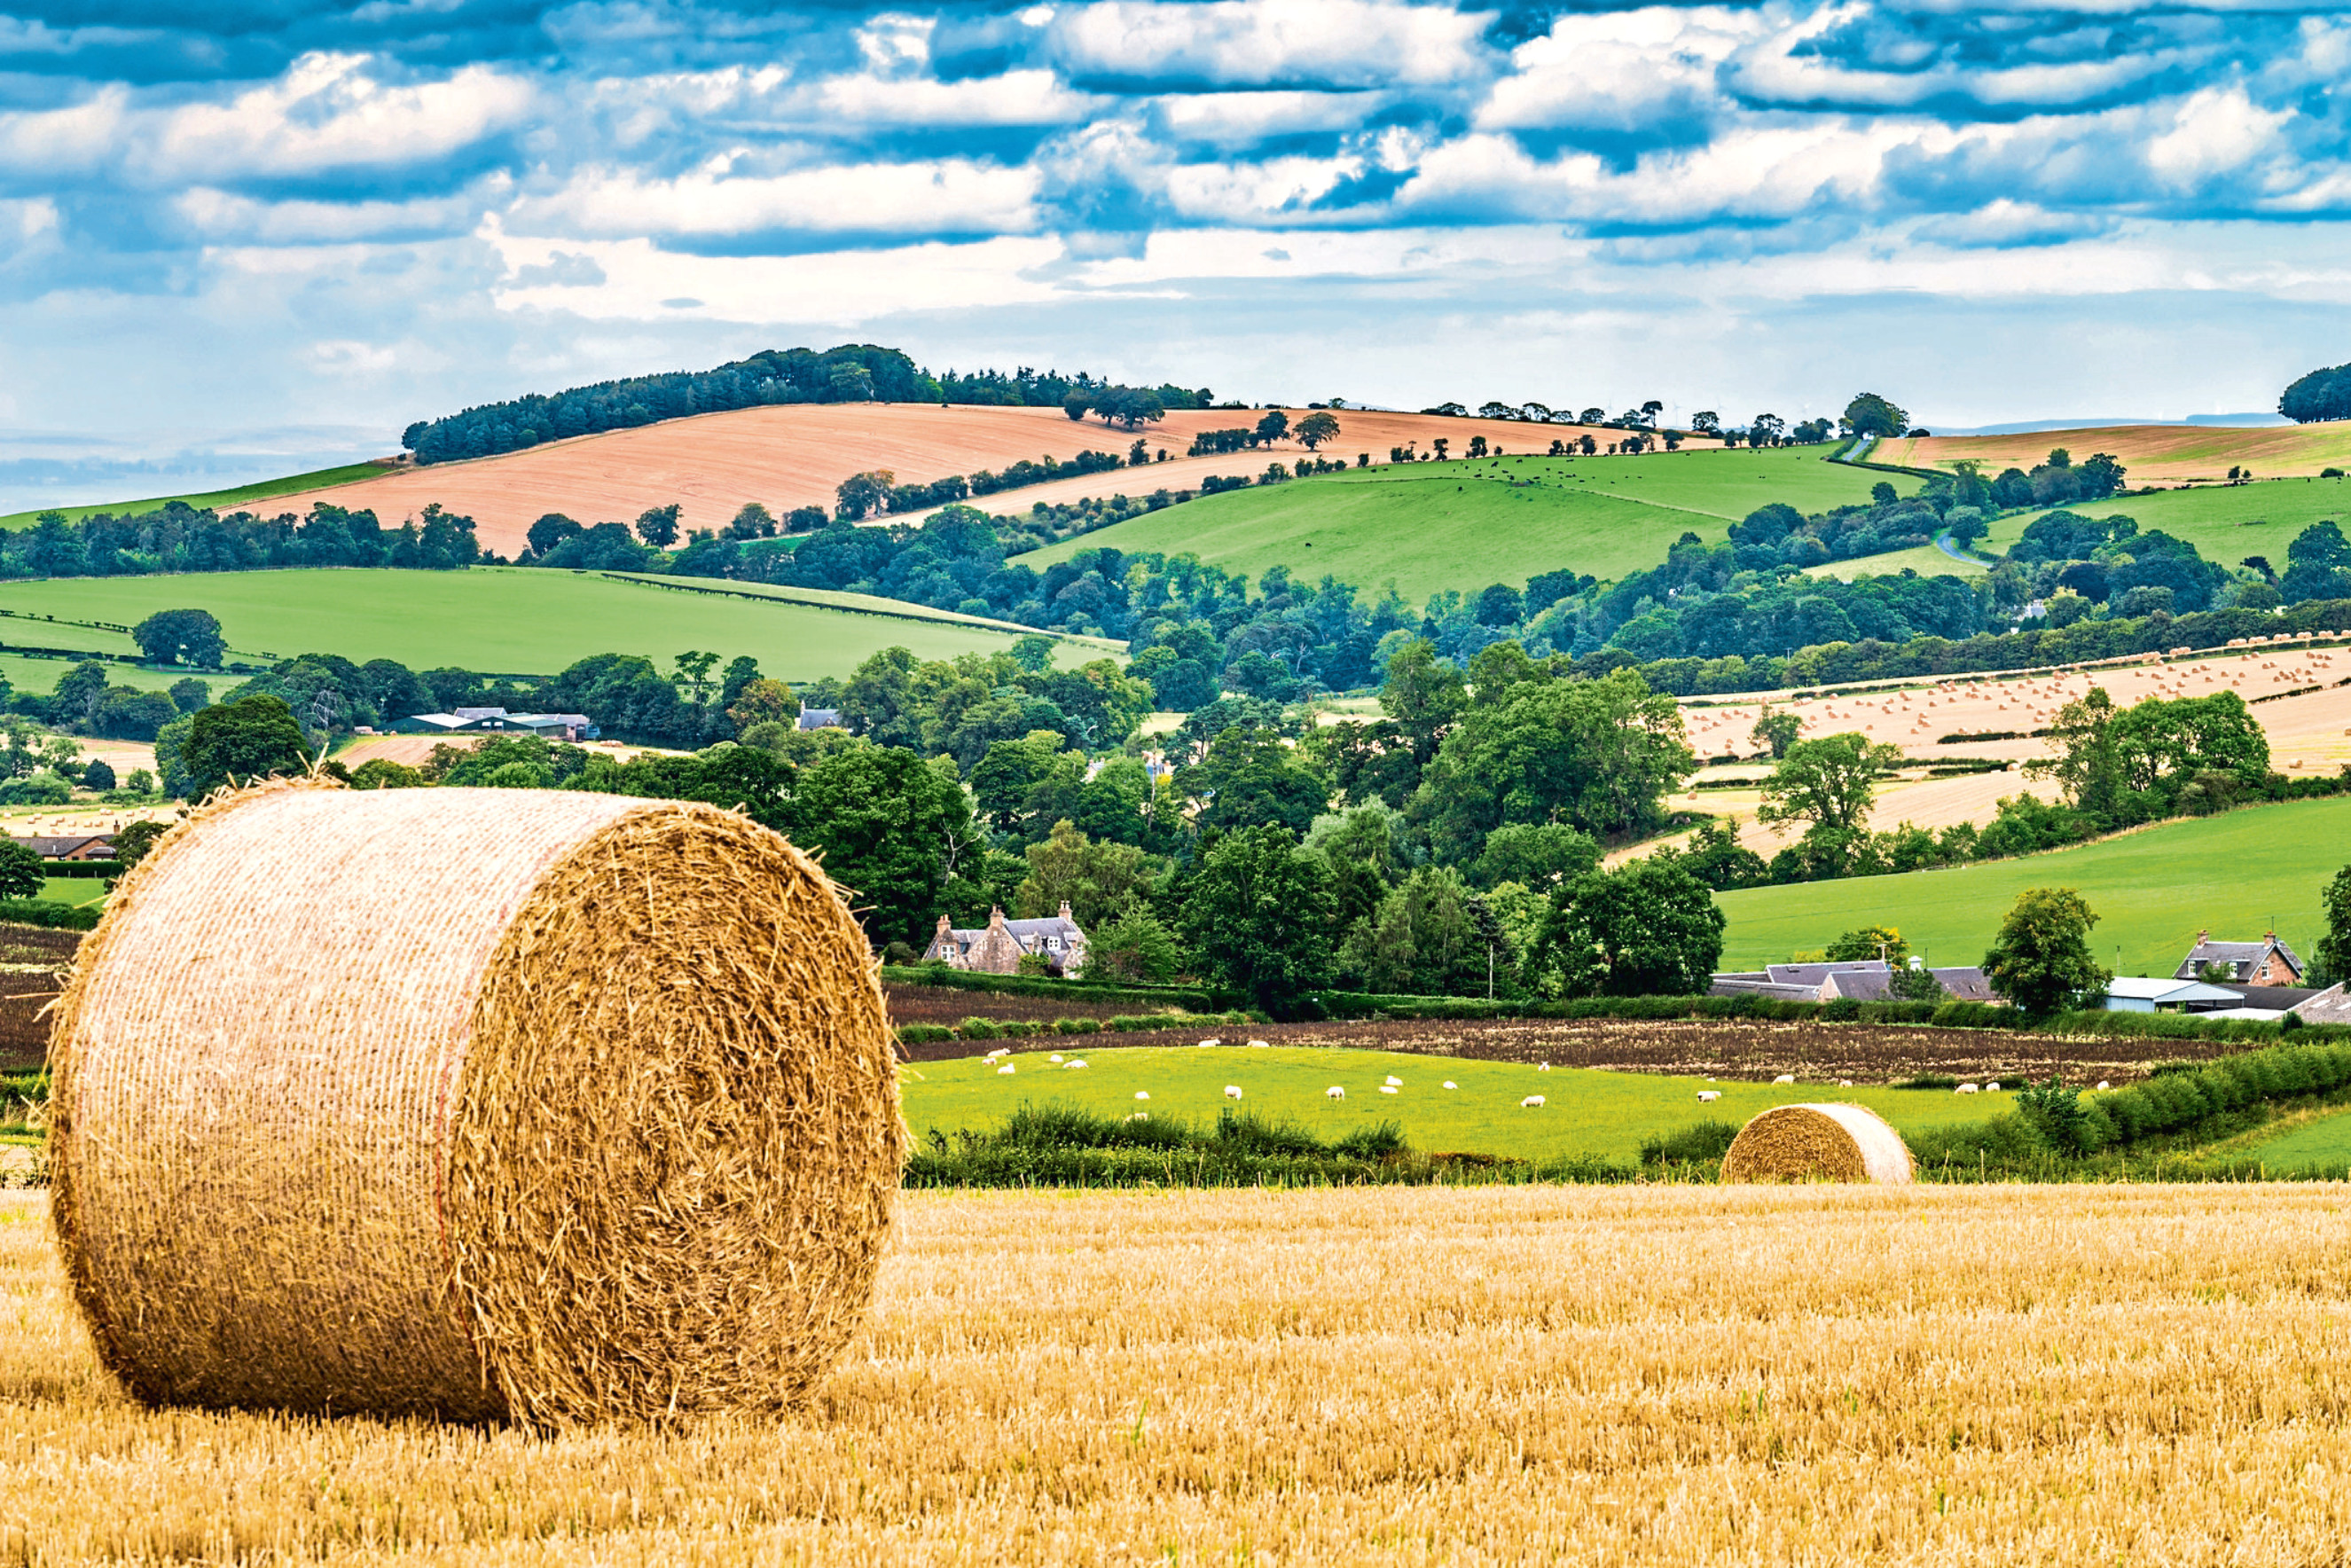 The Bew Review has set out its conclusions on how agricultural funding should be allocated.